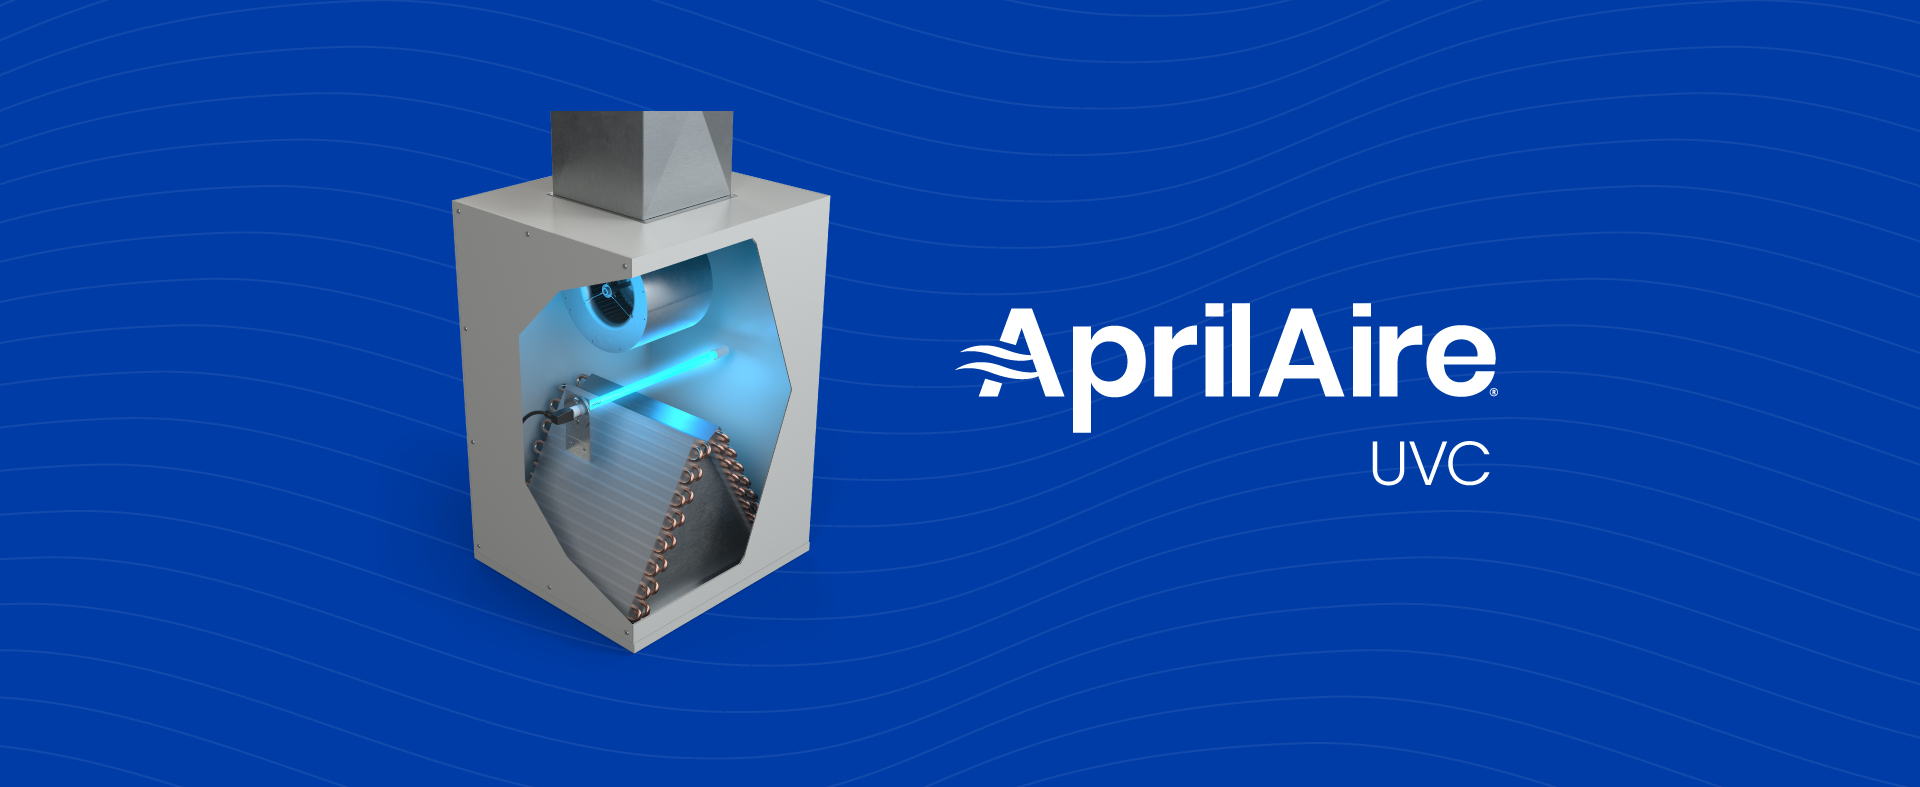 AprilAire Humidifiers